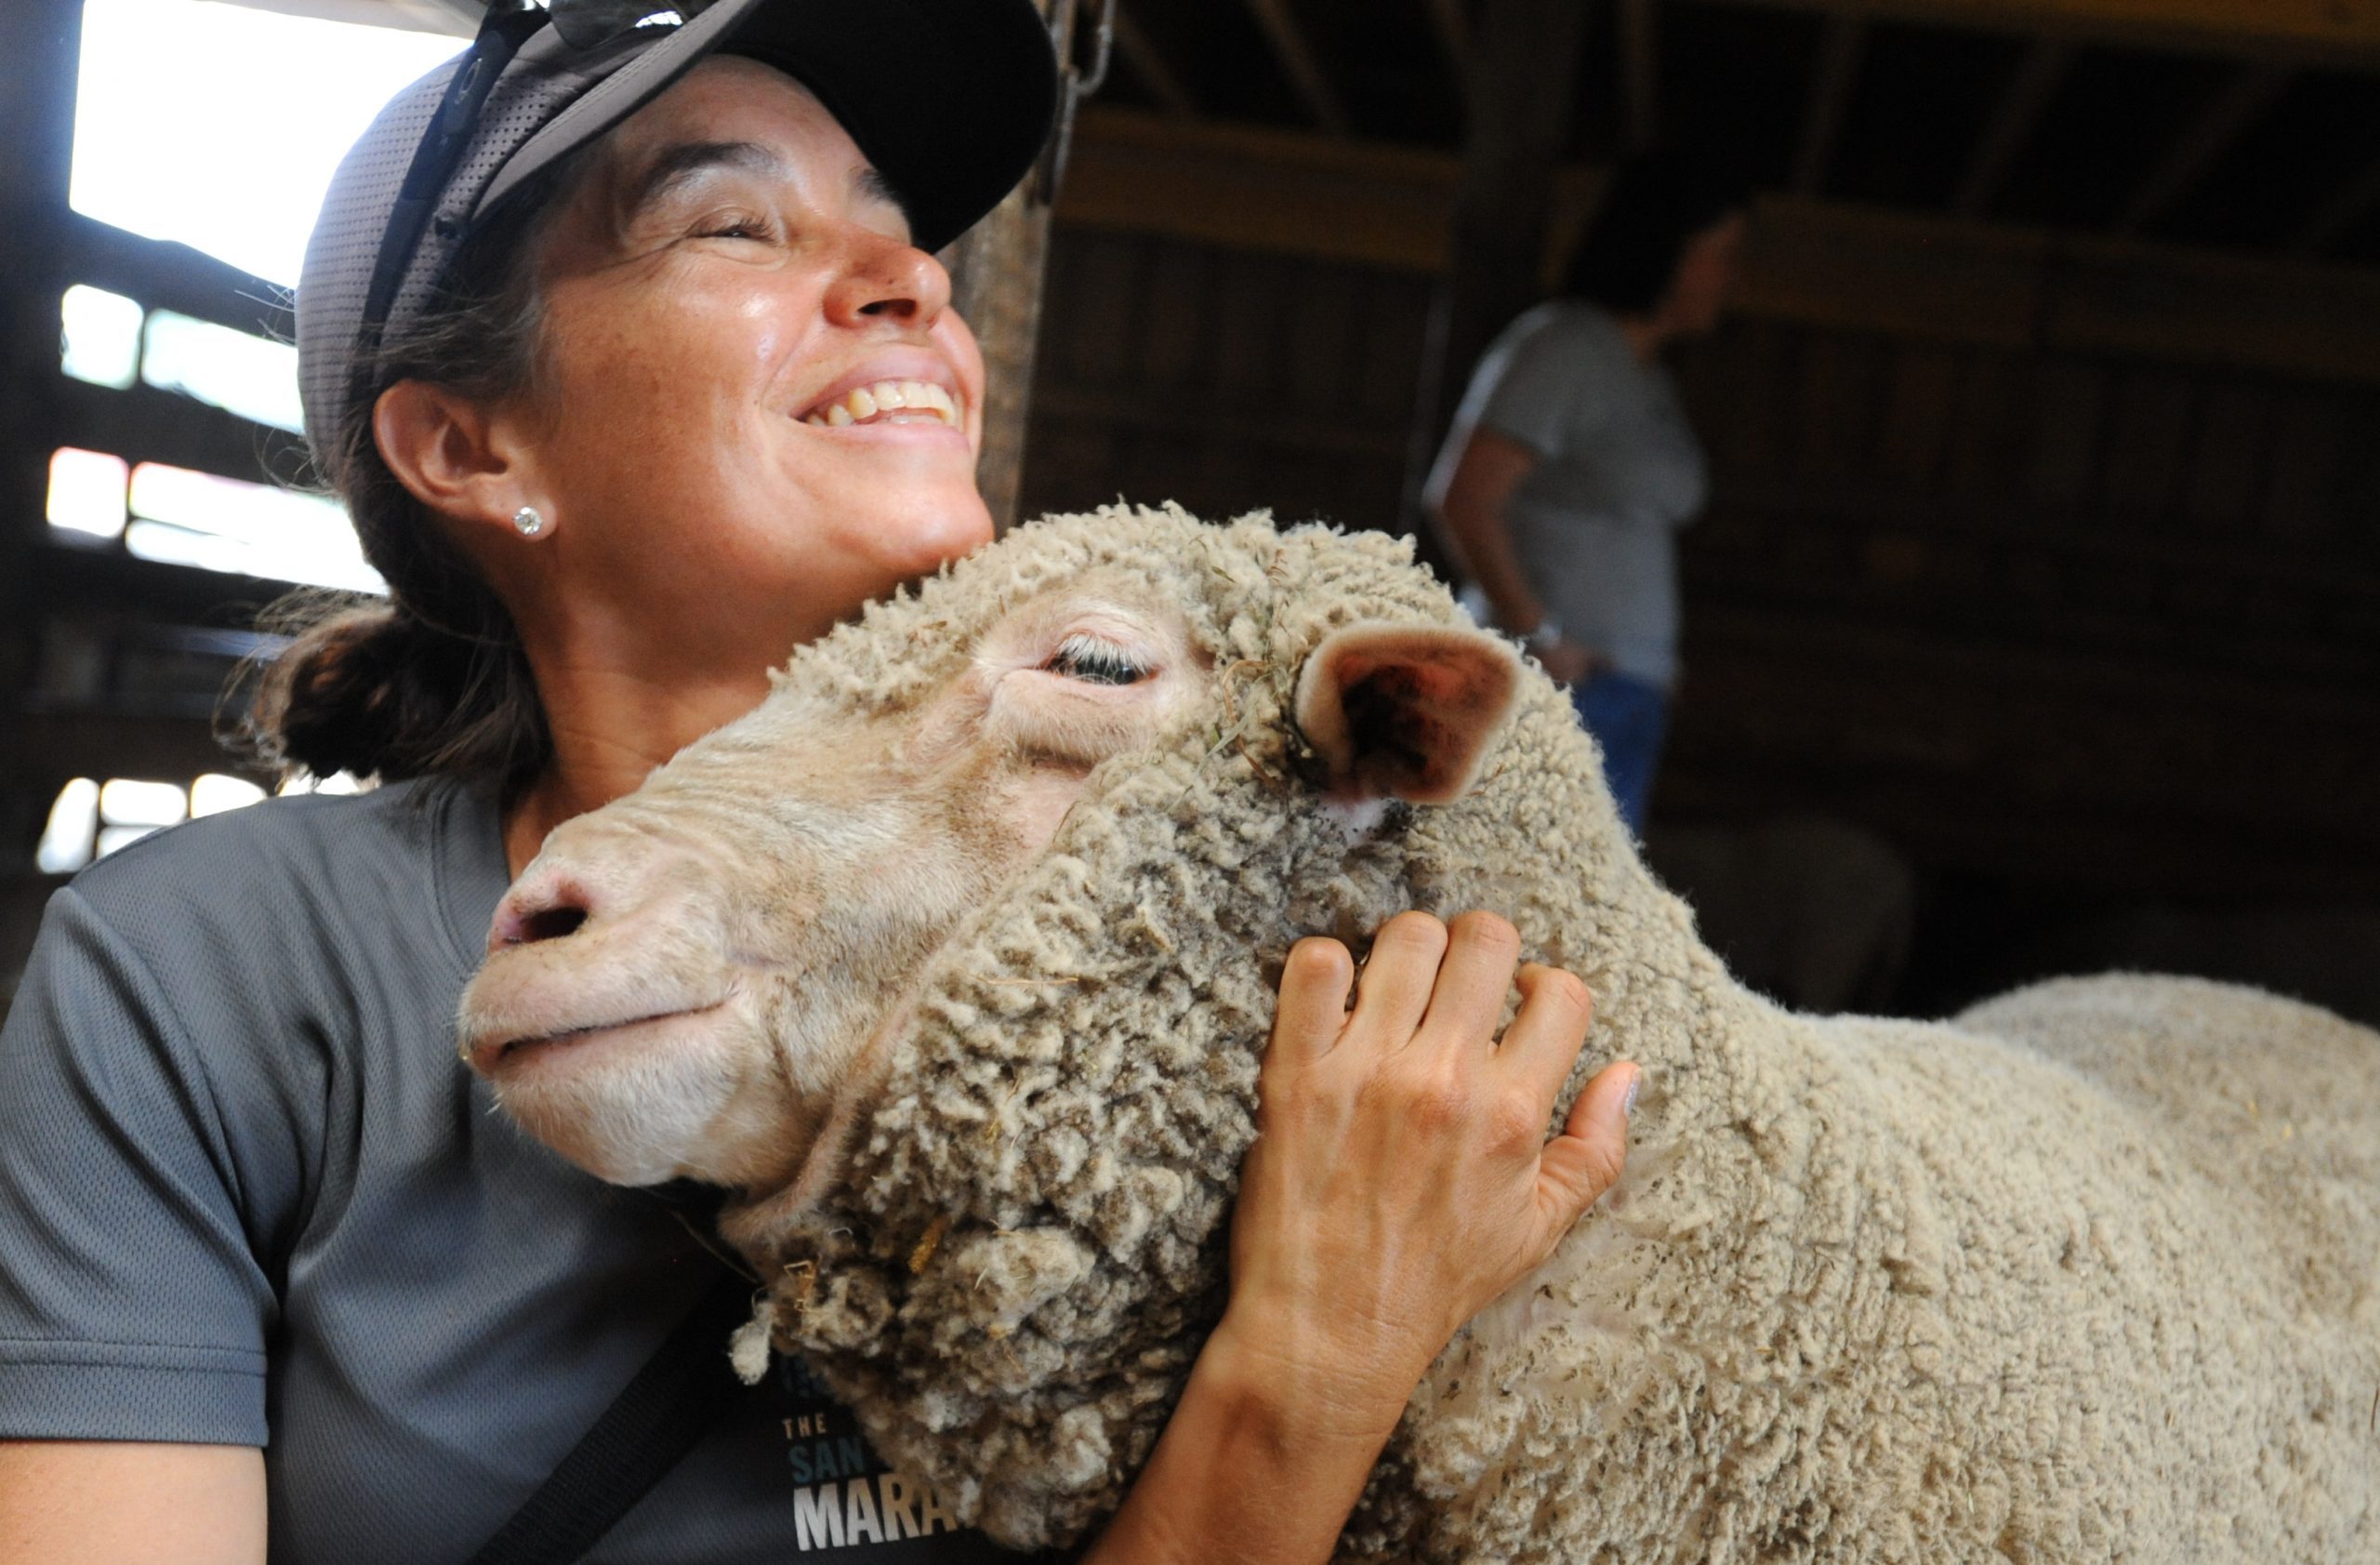 Guest with sheep at Farm Sanctuary, credit Jo-Anne McArthur